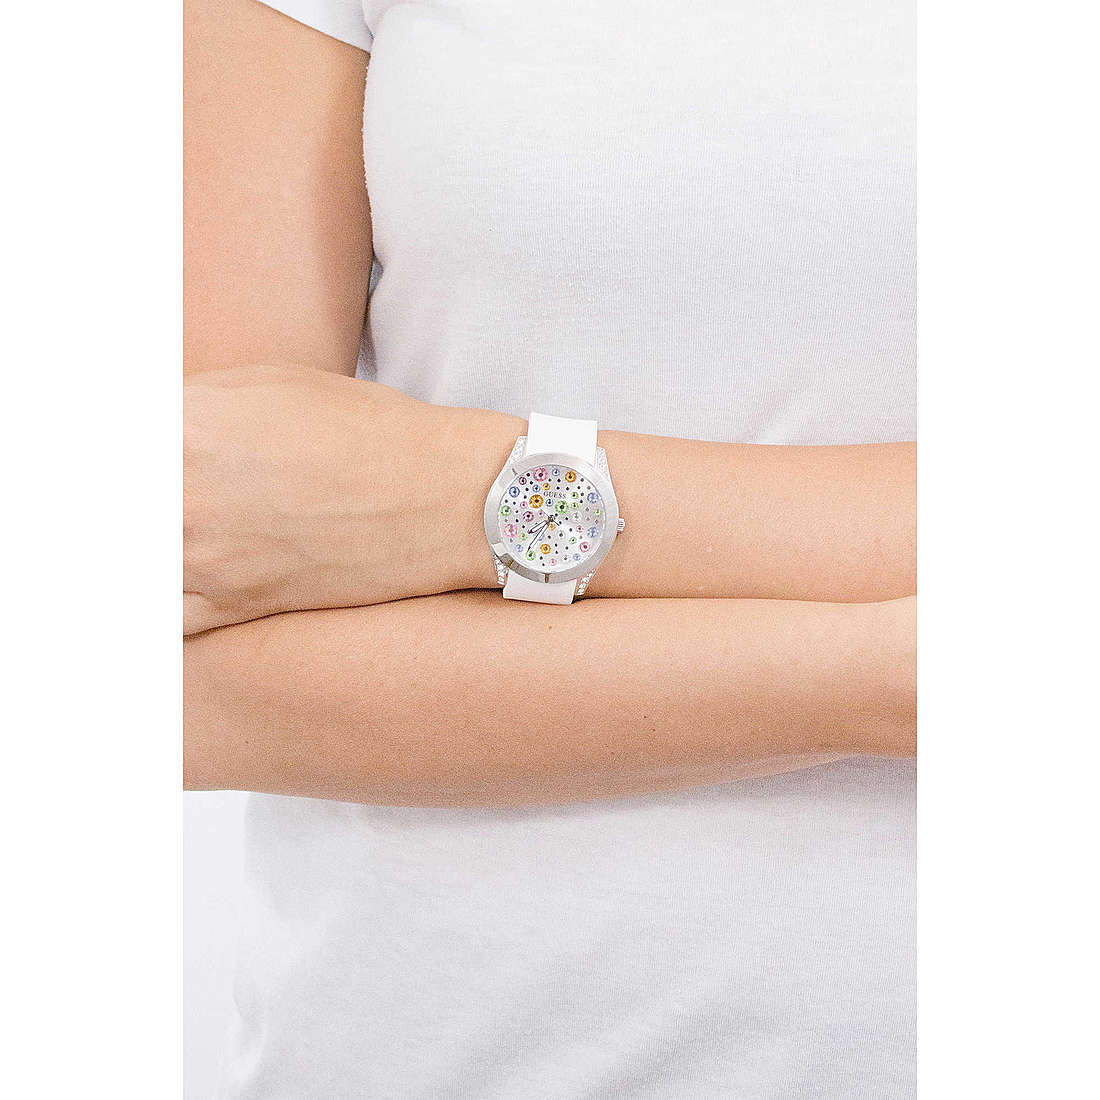 Guess only time Wonderlust woman W1059L1 wearing